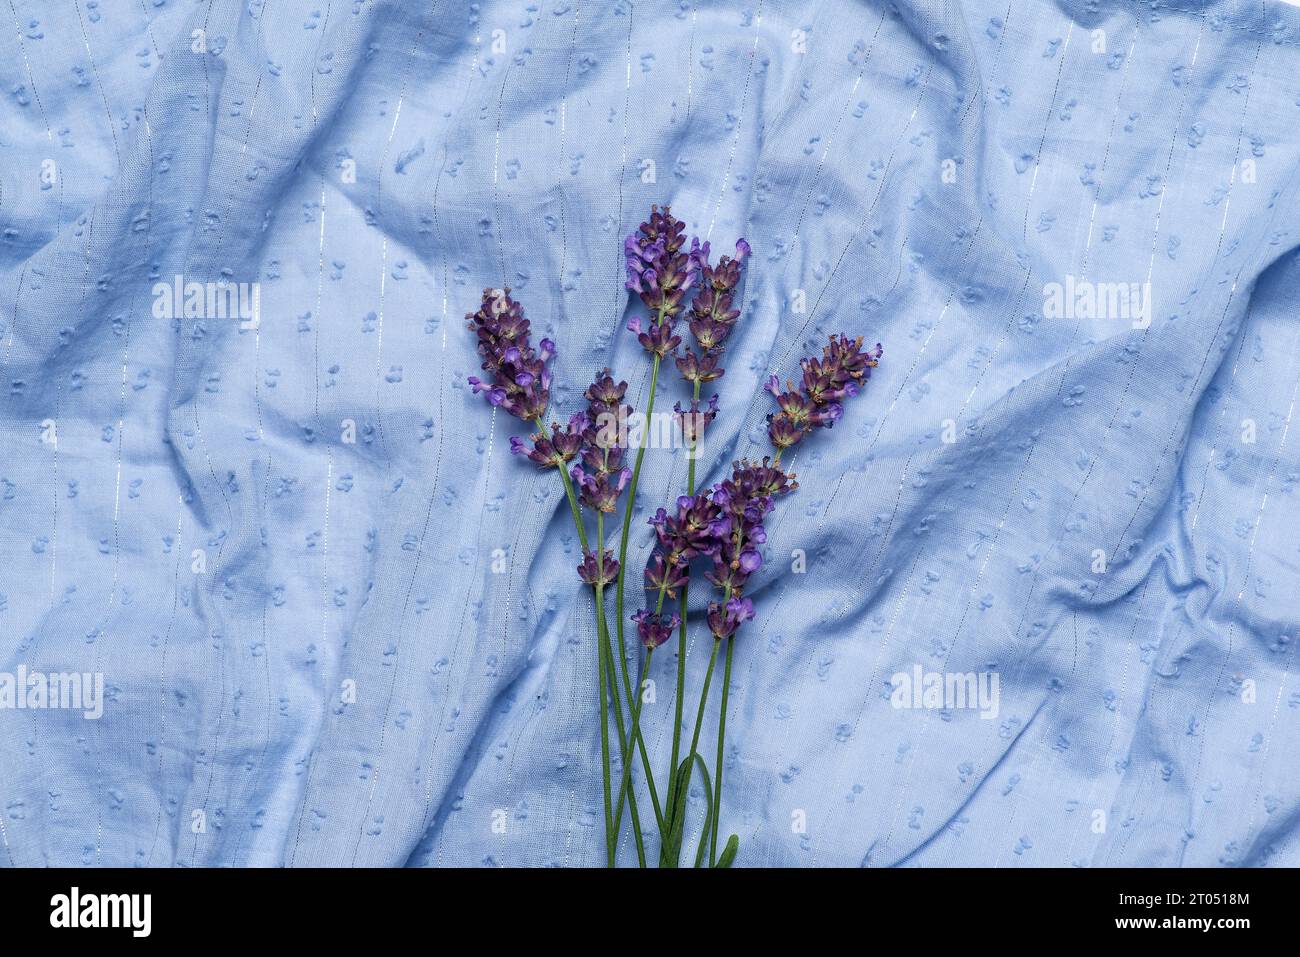 Beautiful flower of fresh fragrant lavender on a light blue cloth Stock Photo